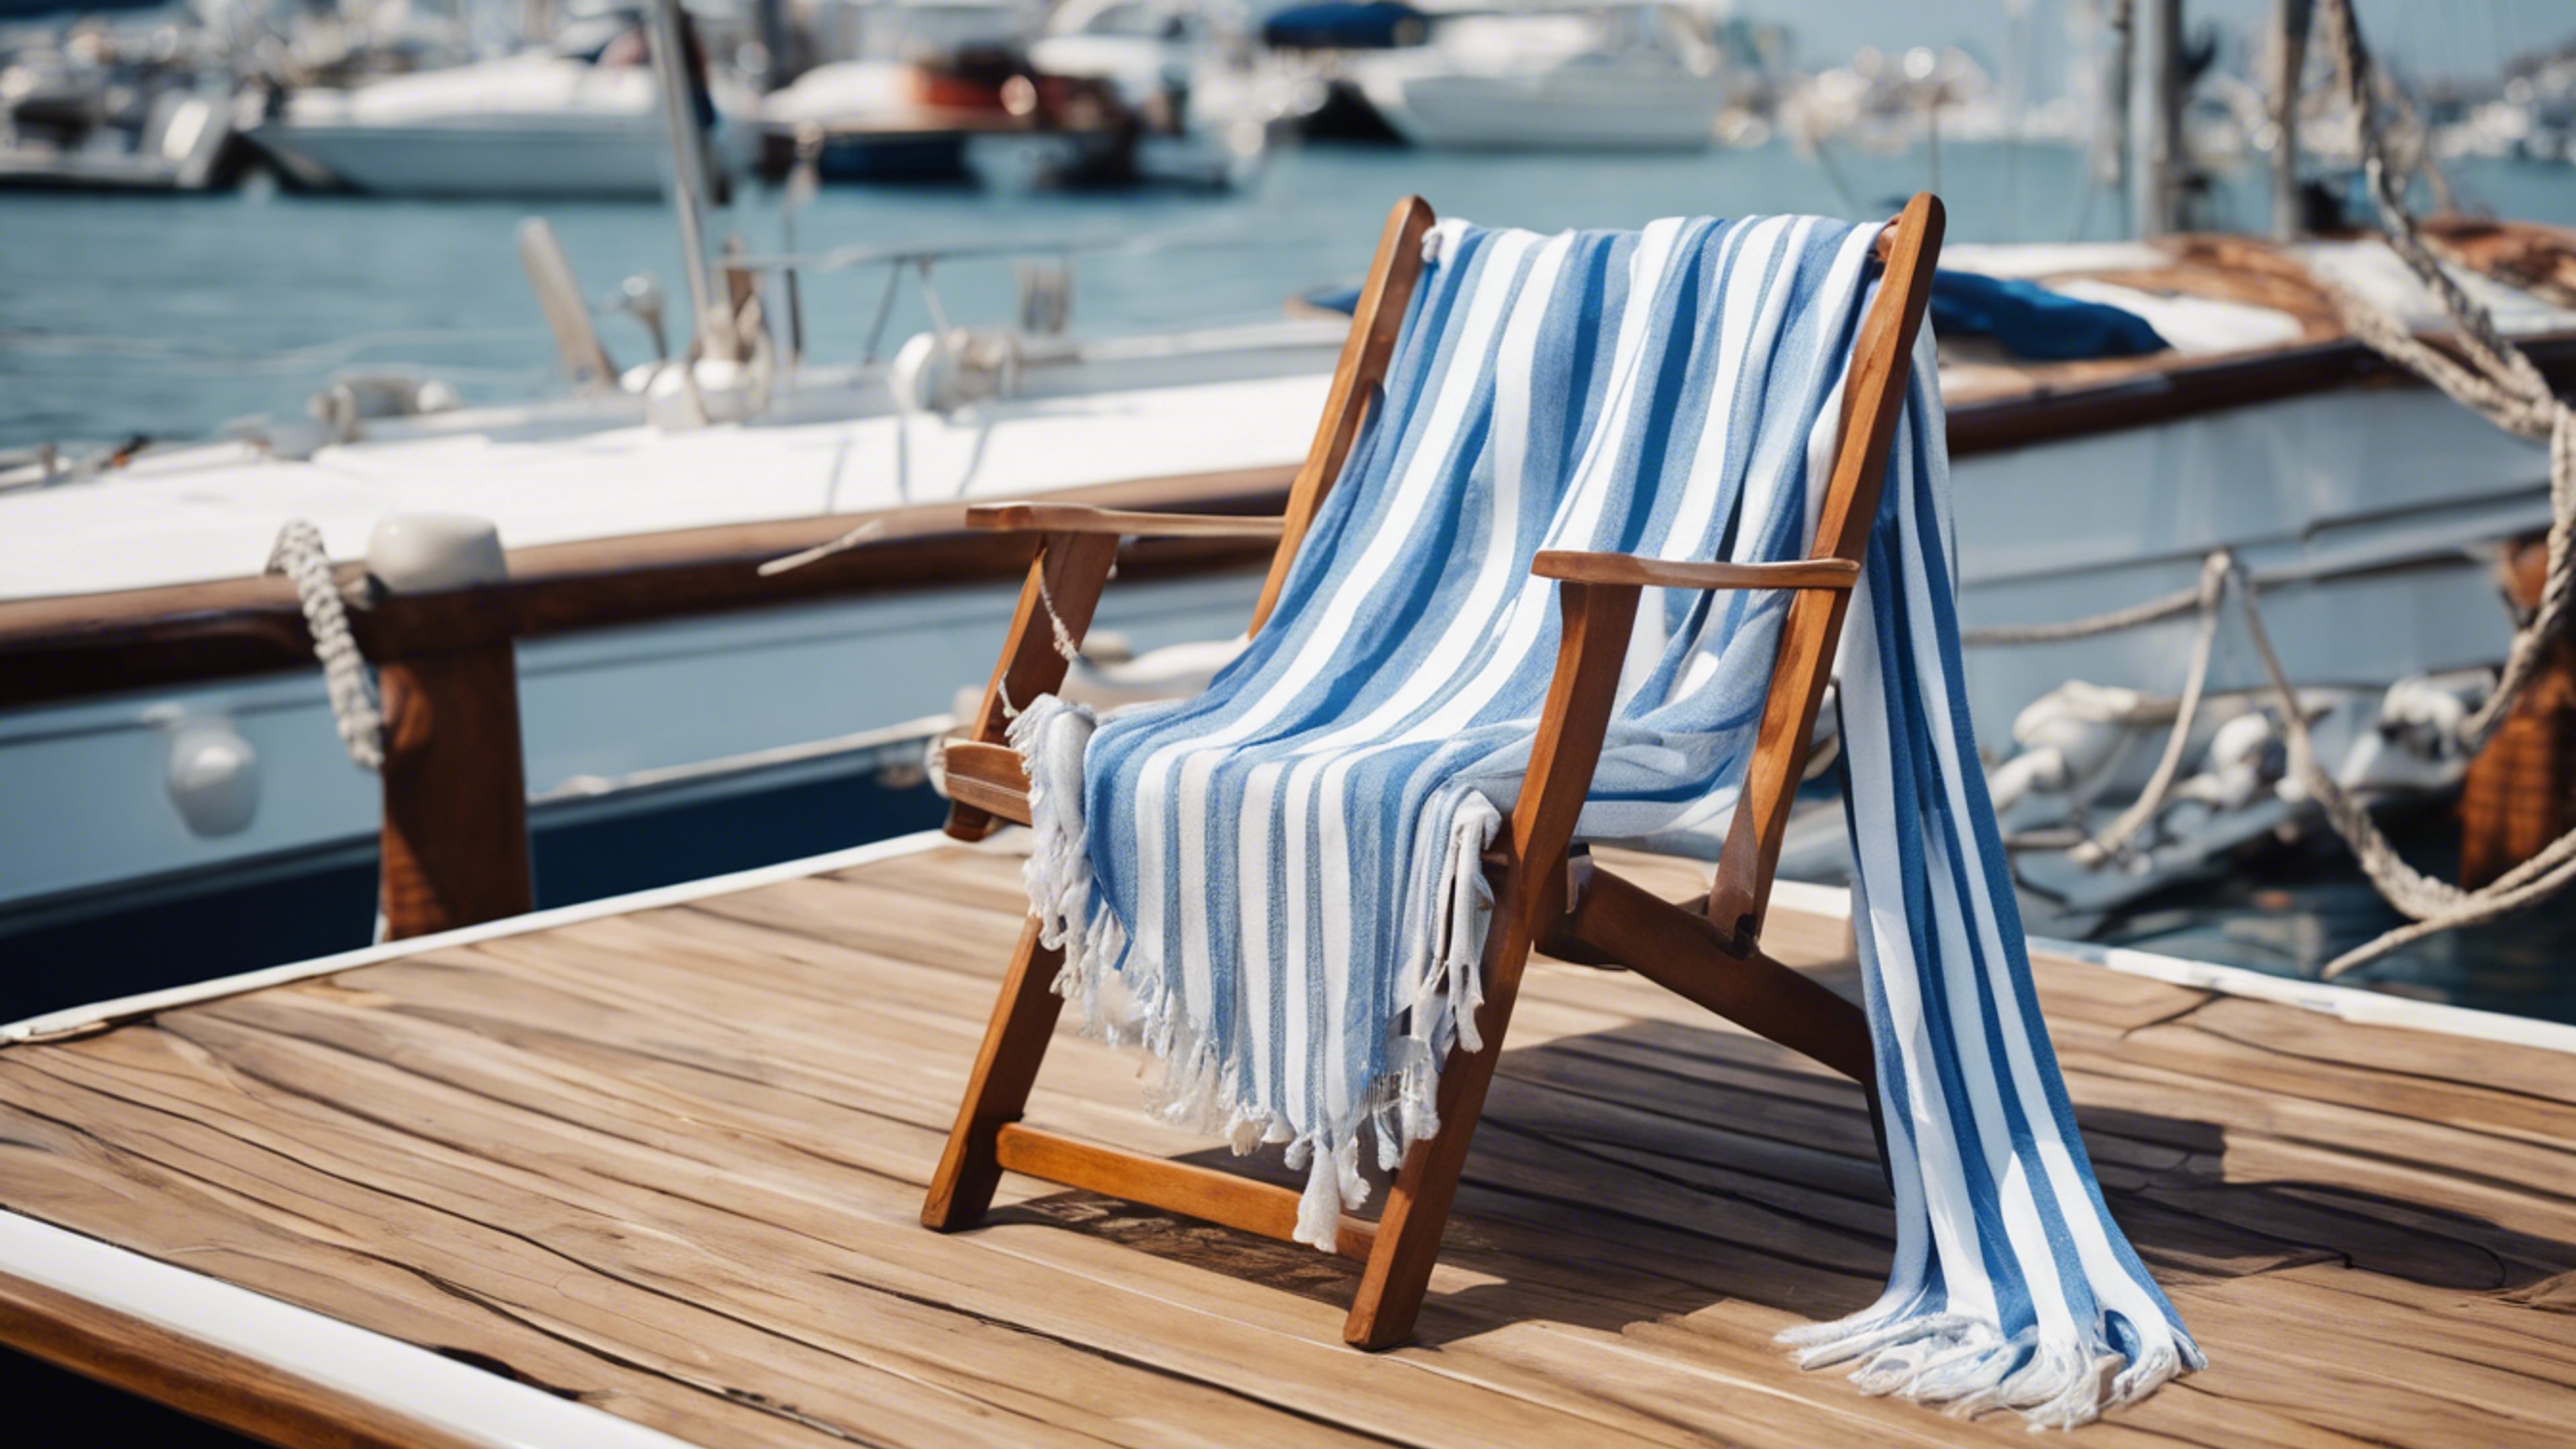 Preppy blue and white striped shawl draped over a teak deck chair on a sailboat. Kertas dinding[8e59a438a9aa4e06a25d]